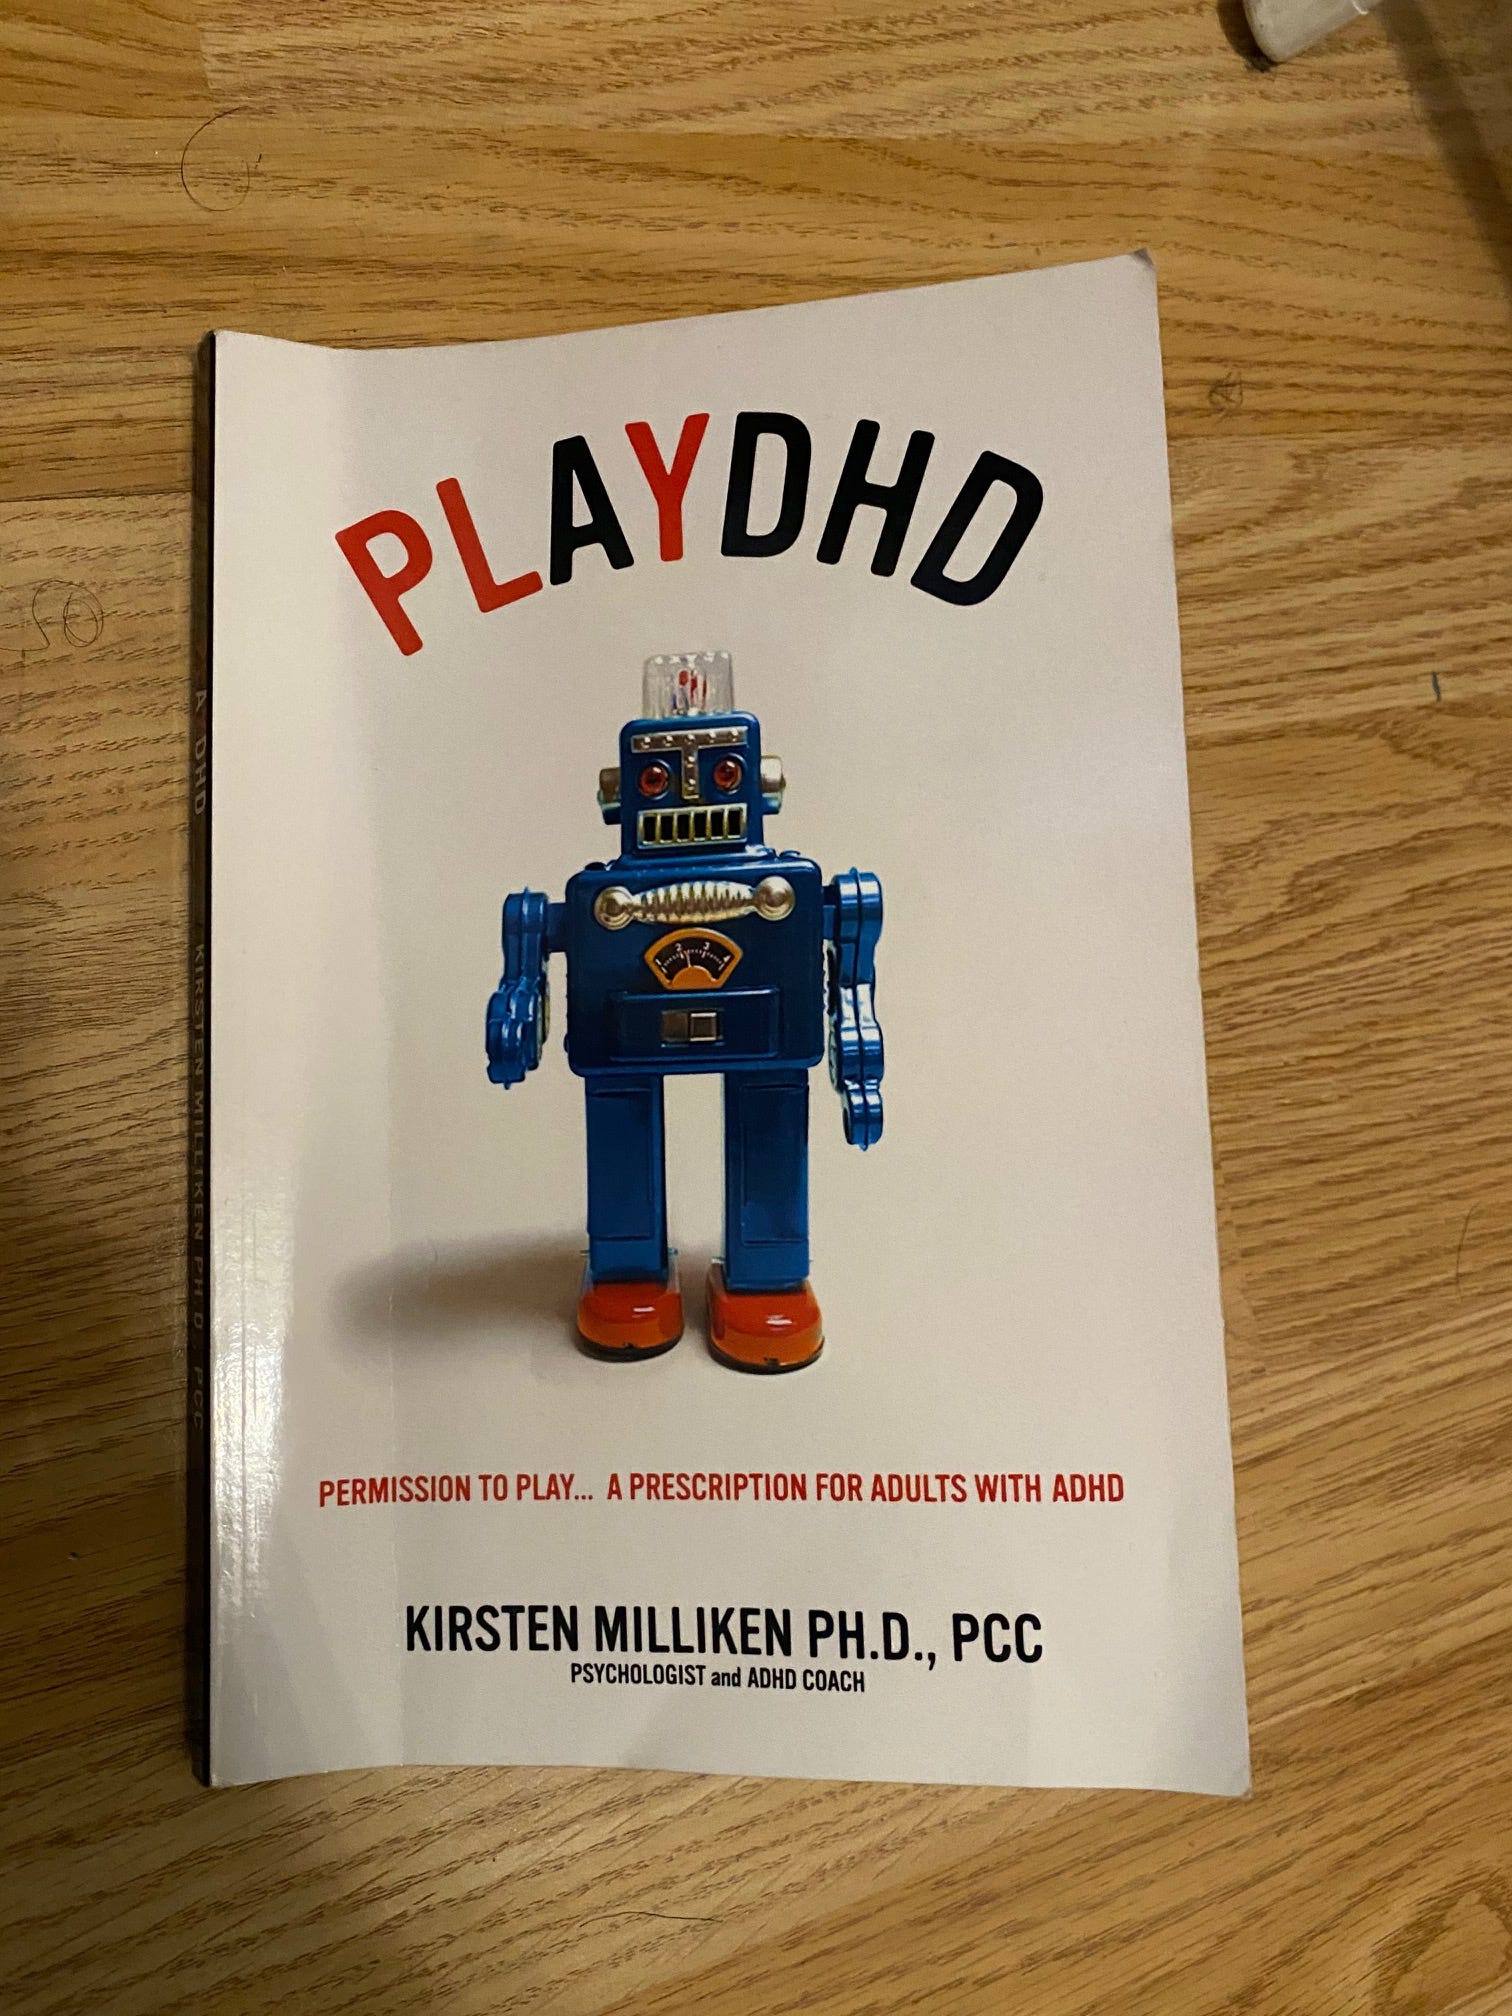 ADHD book review PLAYDHD by Dr Kirsten Milliken